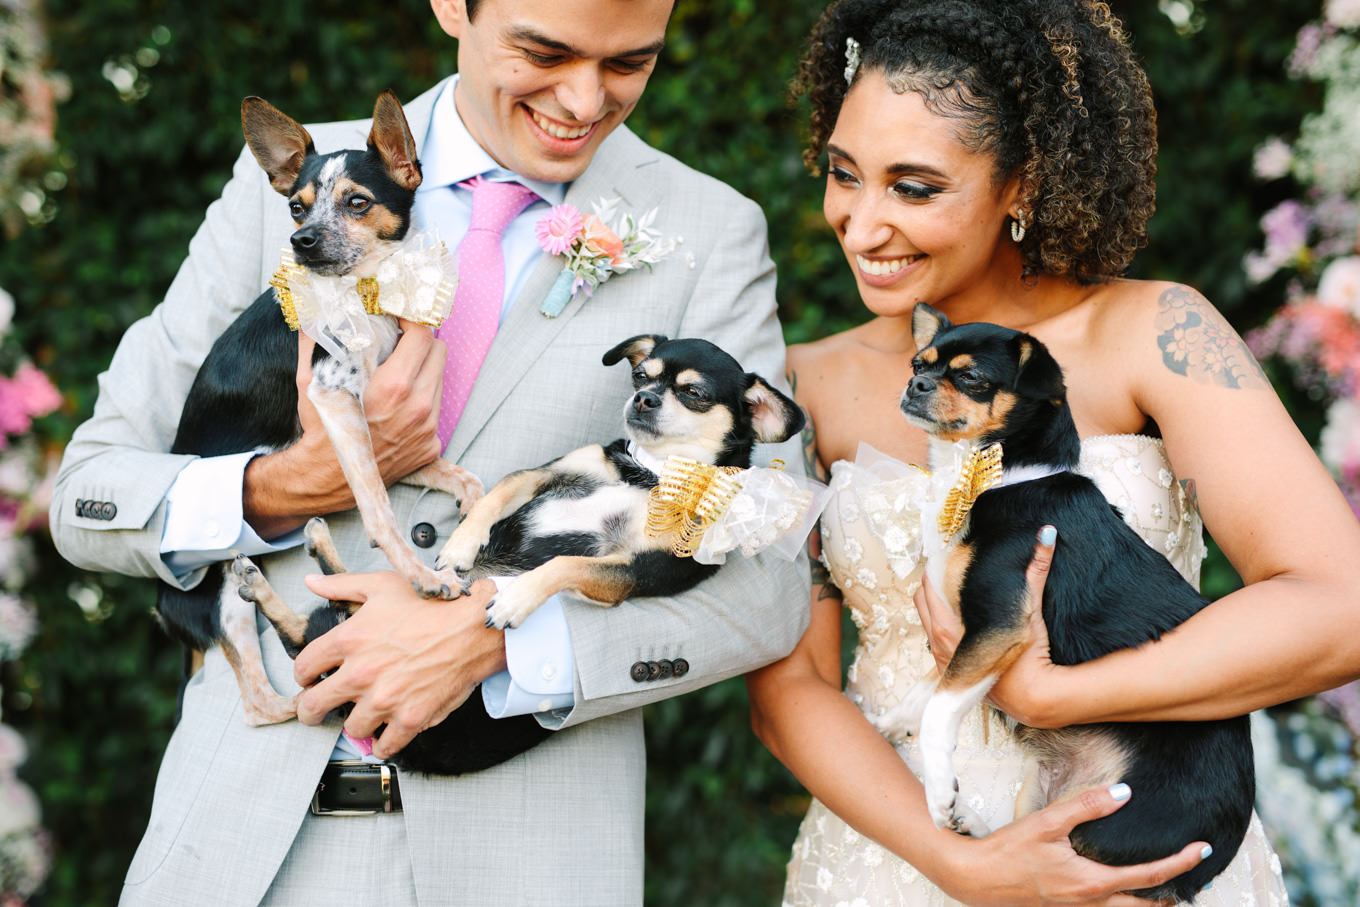 Bride and groom with three dogs | Colorful pop-up micro wedding at The Ruby Street Los Angeles featured on Green Wedding Shoes | Colorful and elevated photography for fun-loving couples in Southern California | #colorfulwedding #popupwedding #weddingphotography #microwedding Source: Mary Costa Photography | Los Angeles